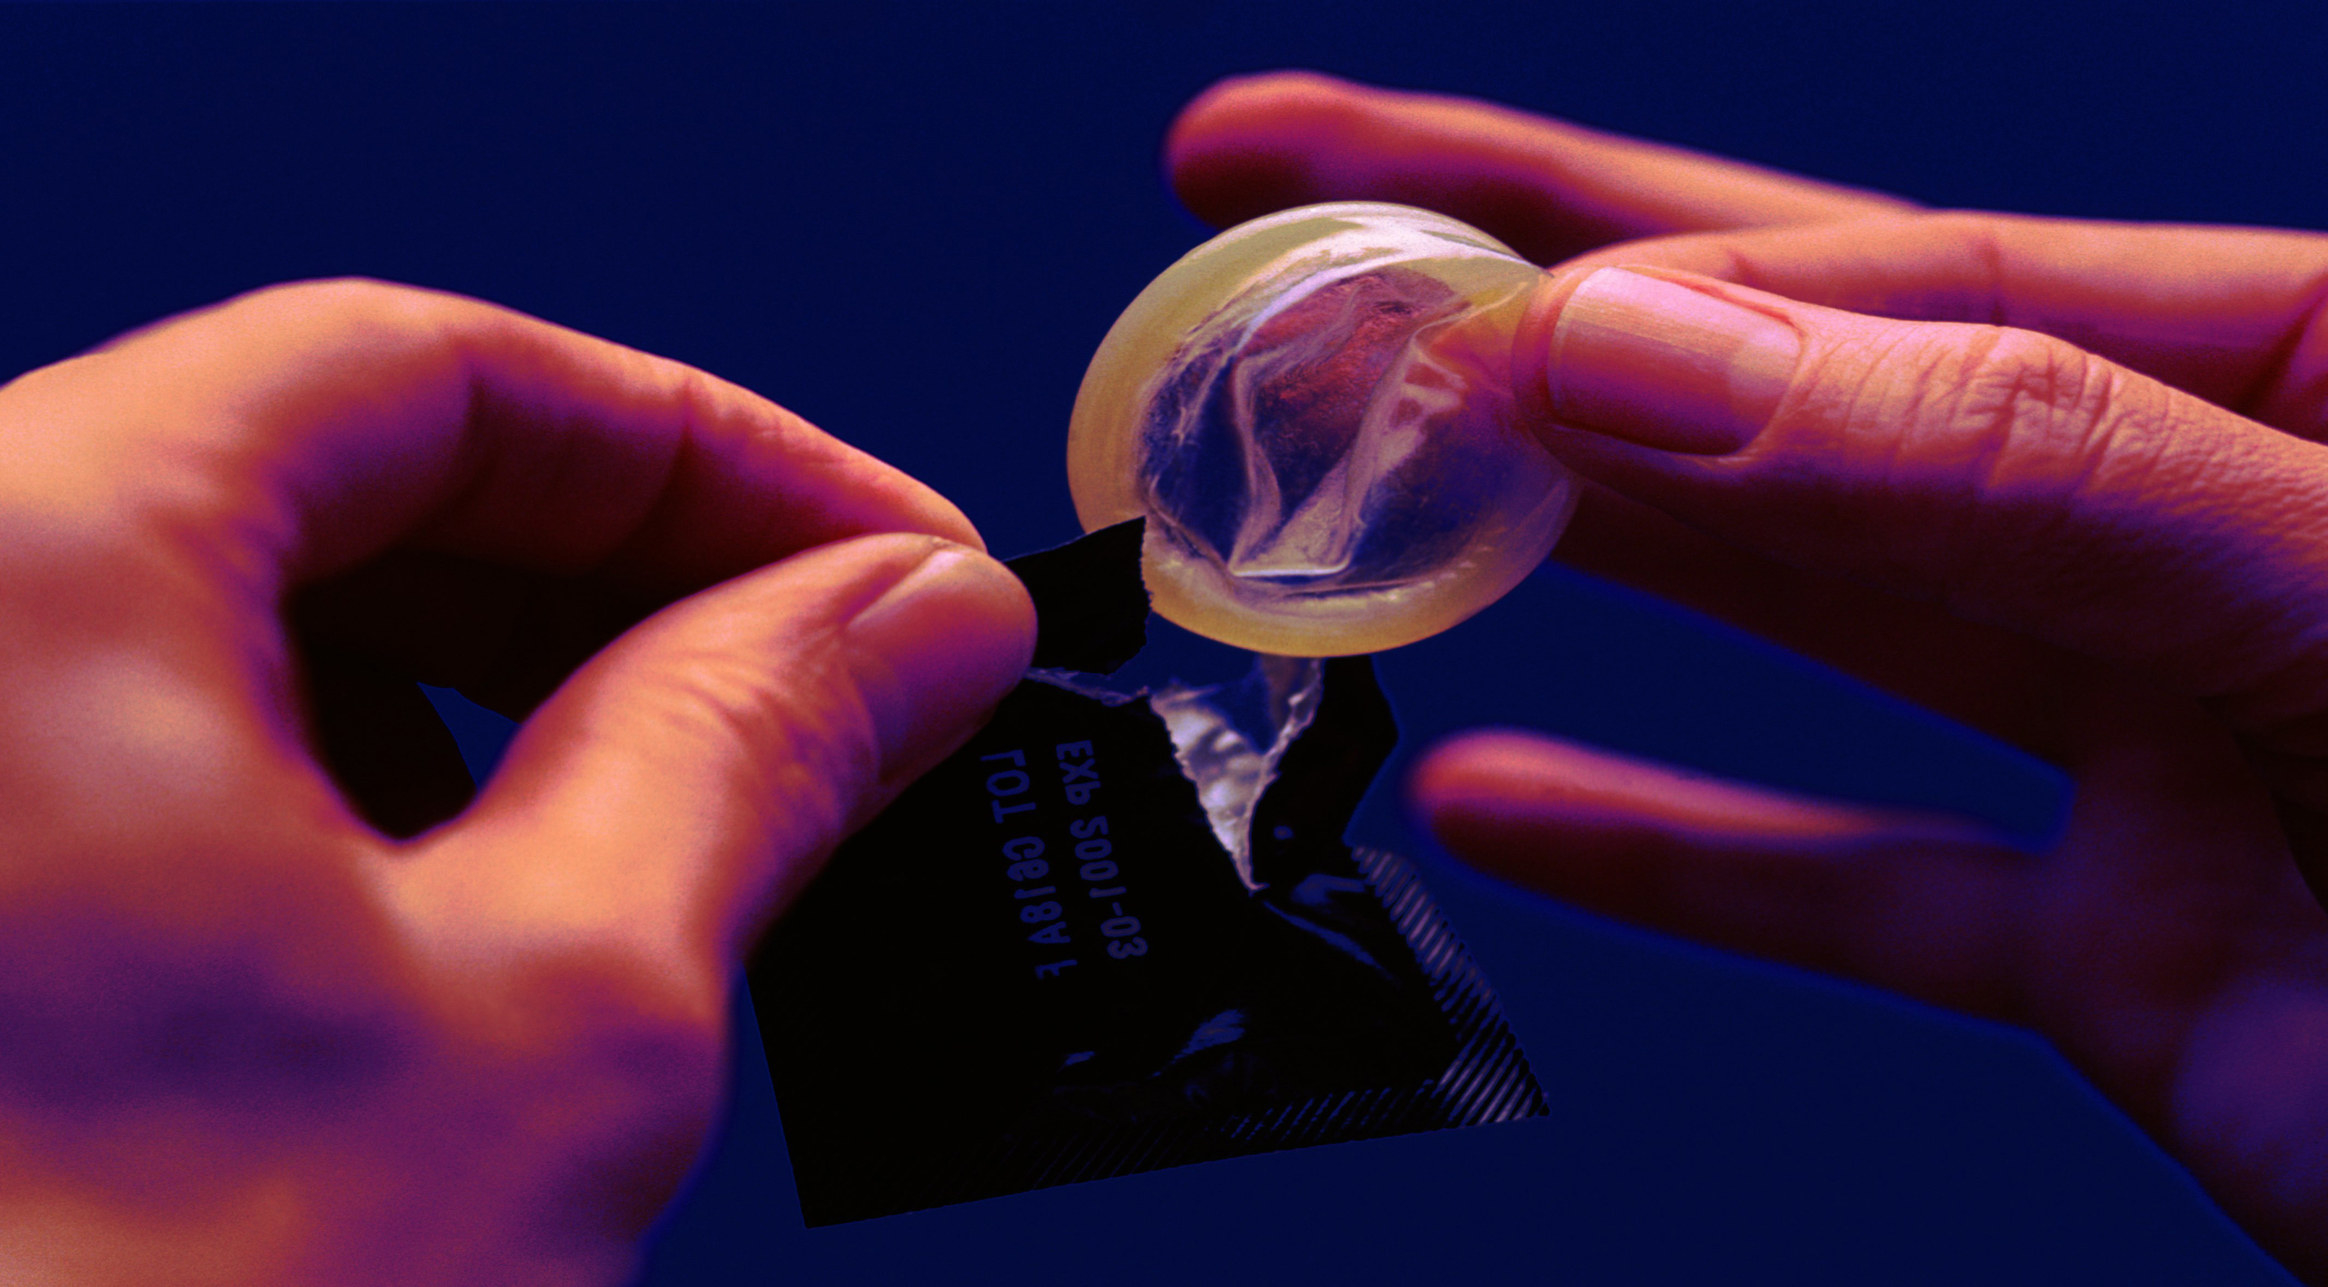 condom being removed from a package